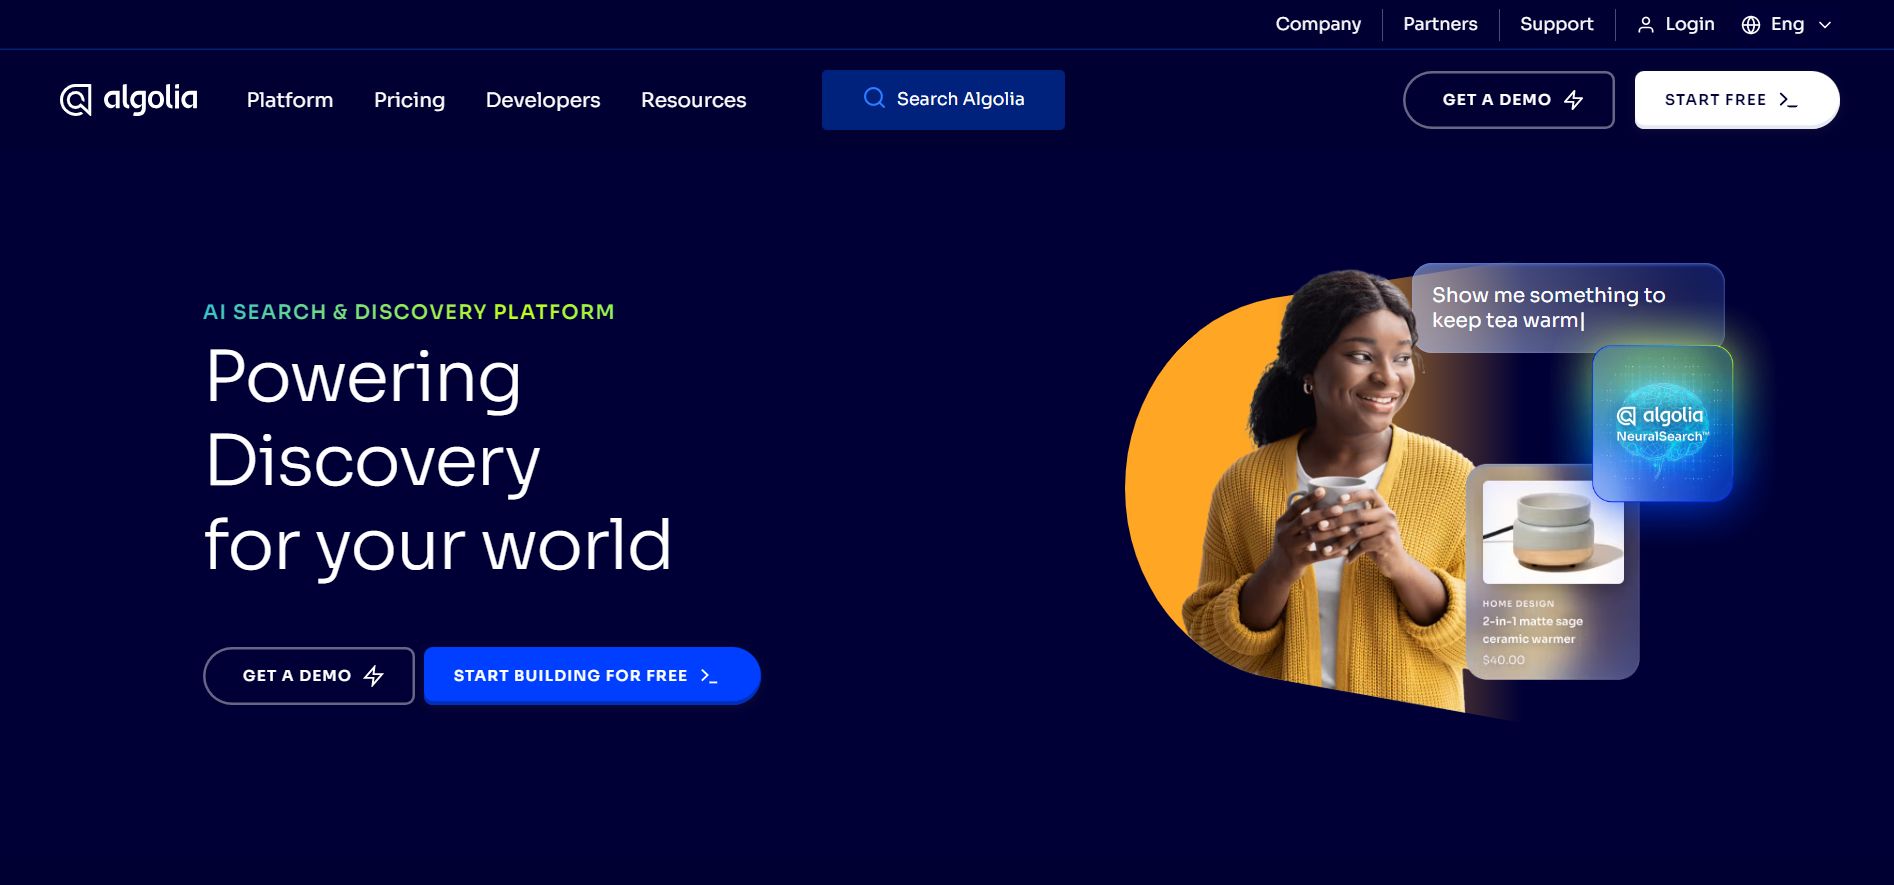 Homepage of Algolia - AI Search & Discovery Platform